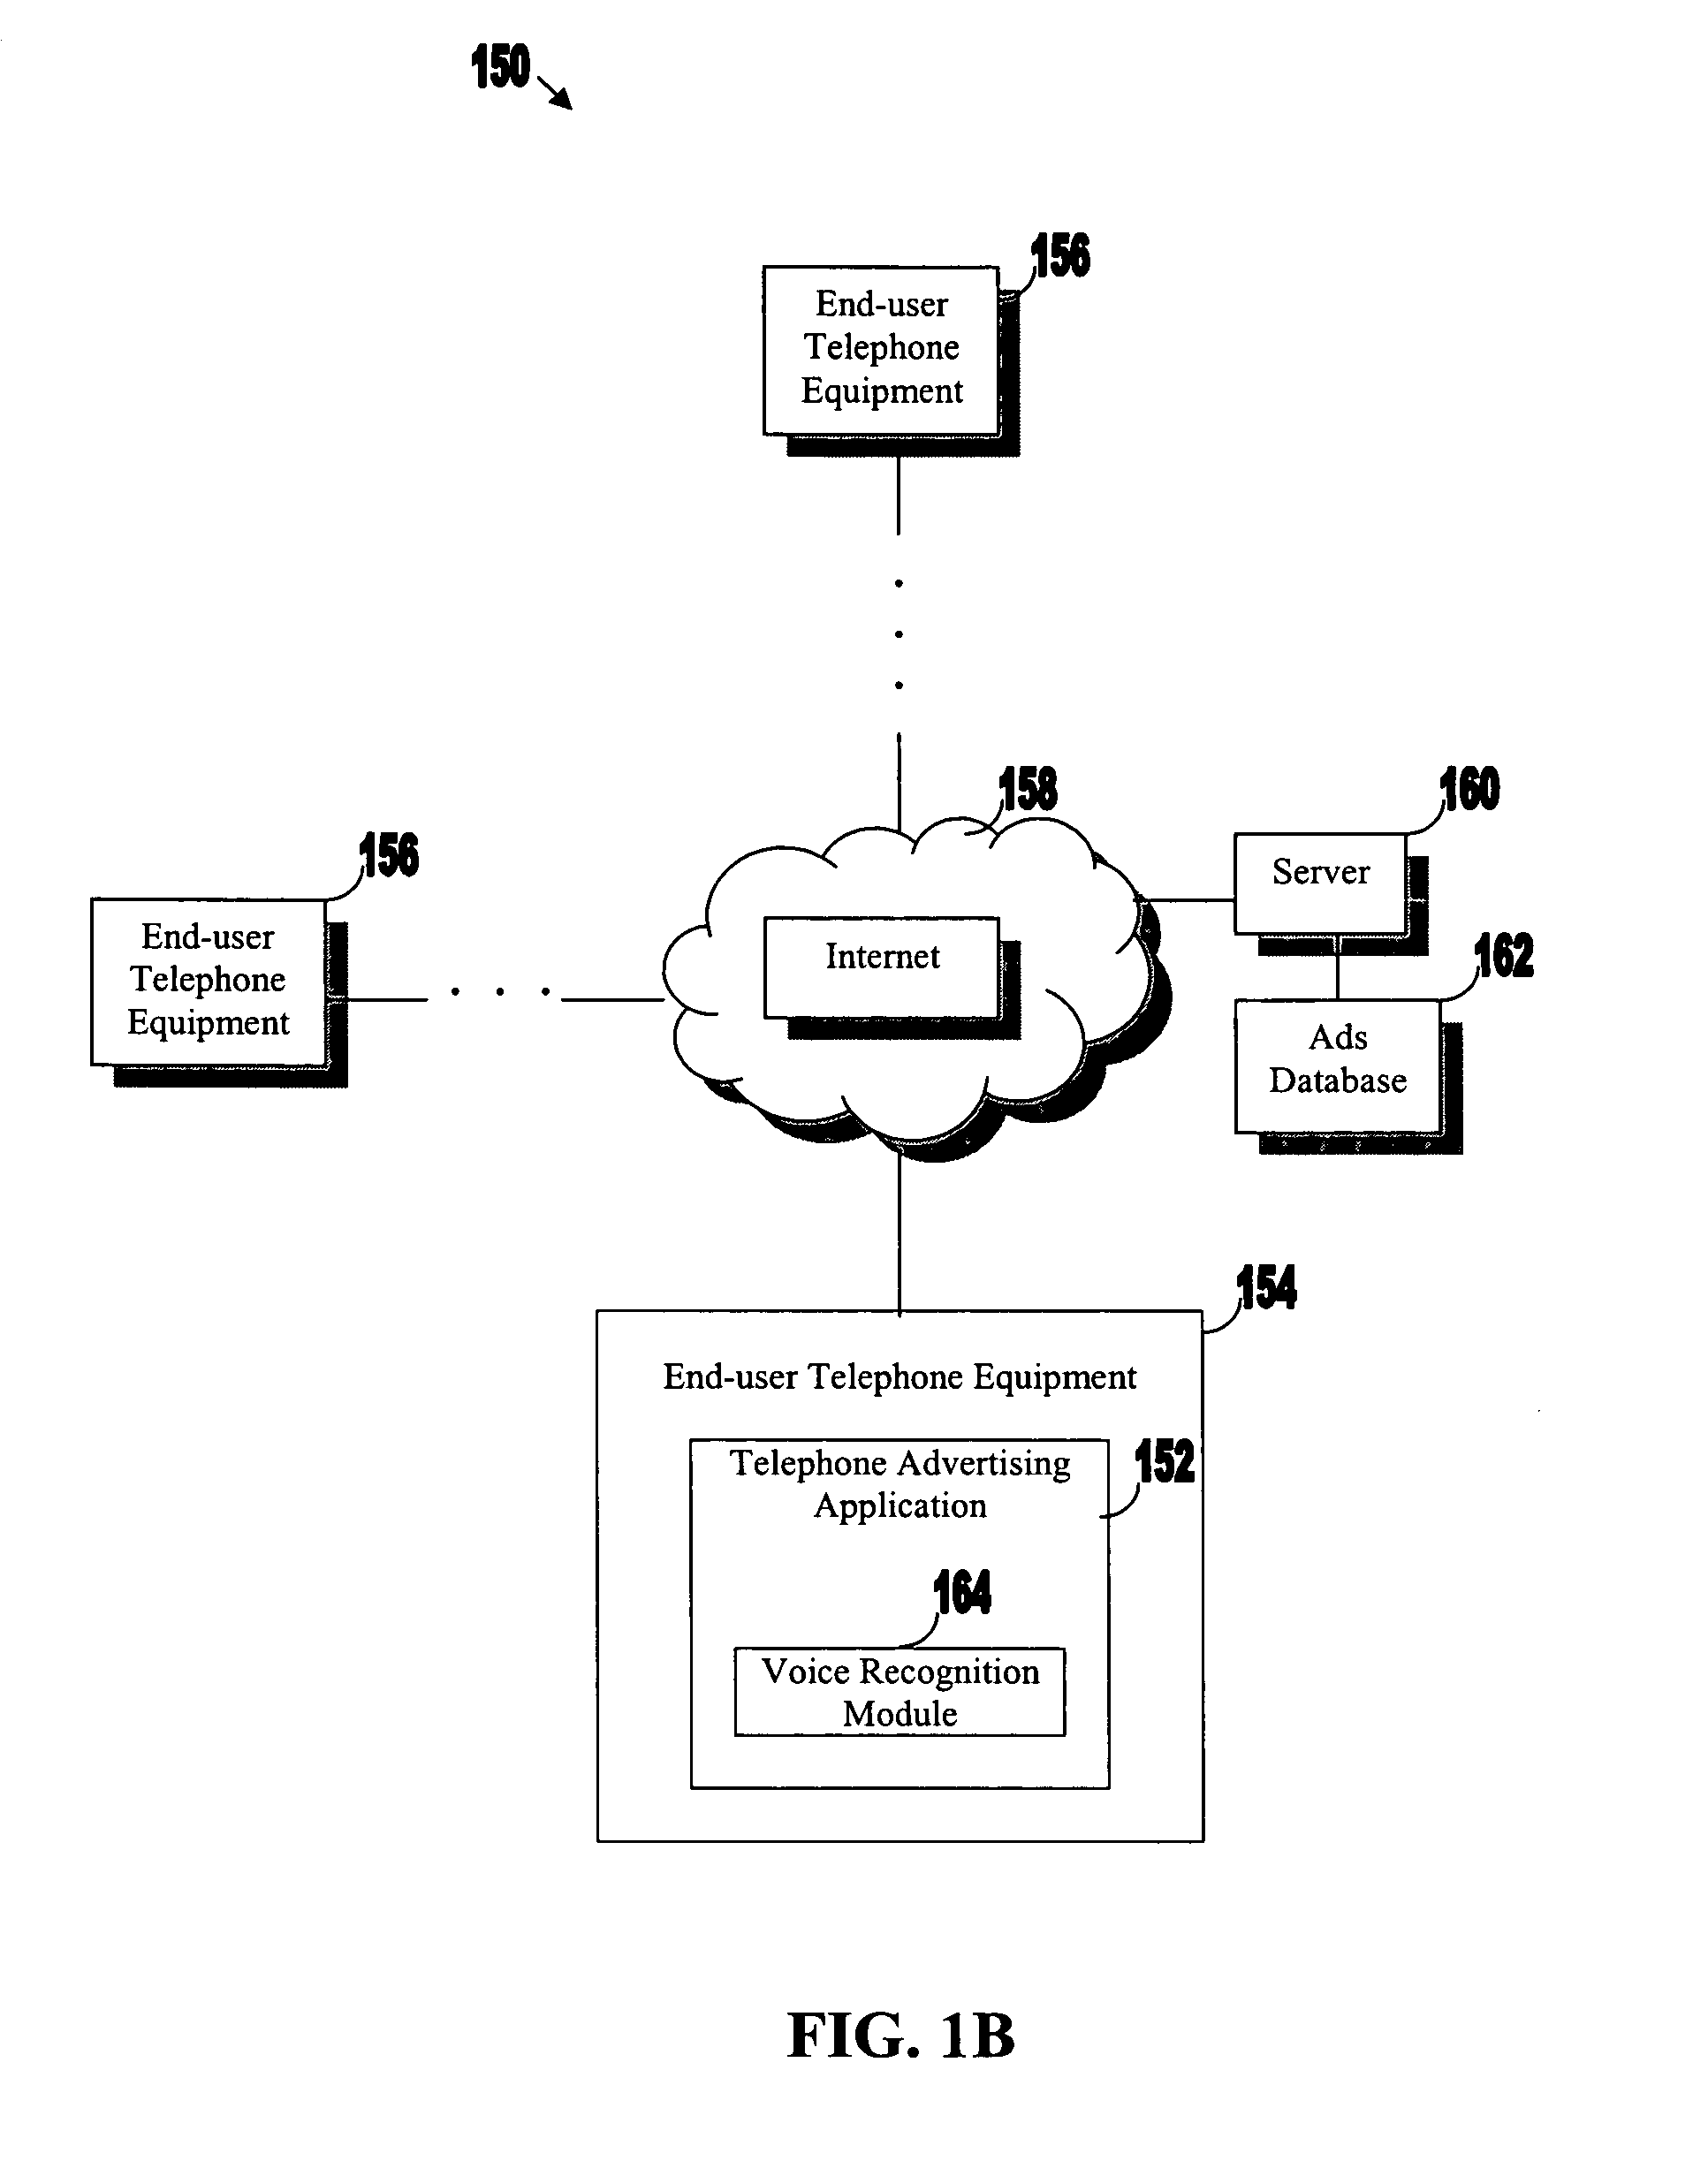 System and method for advertising to telephony end-users